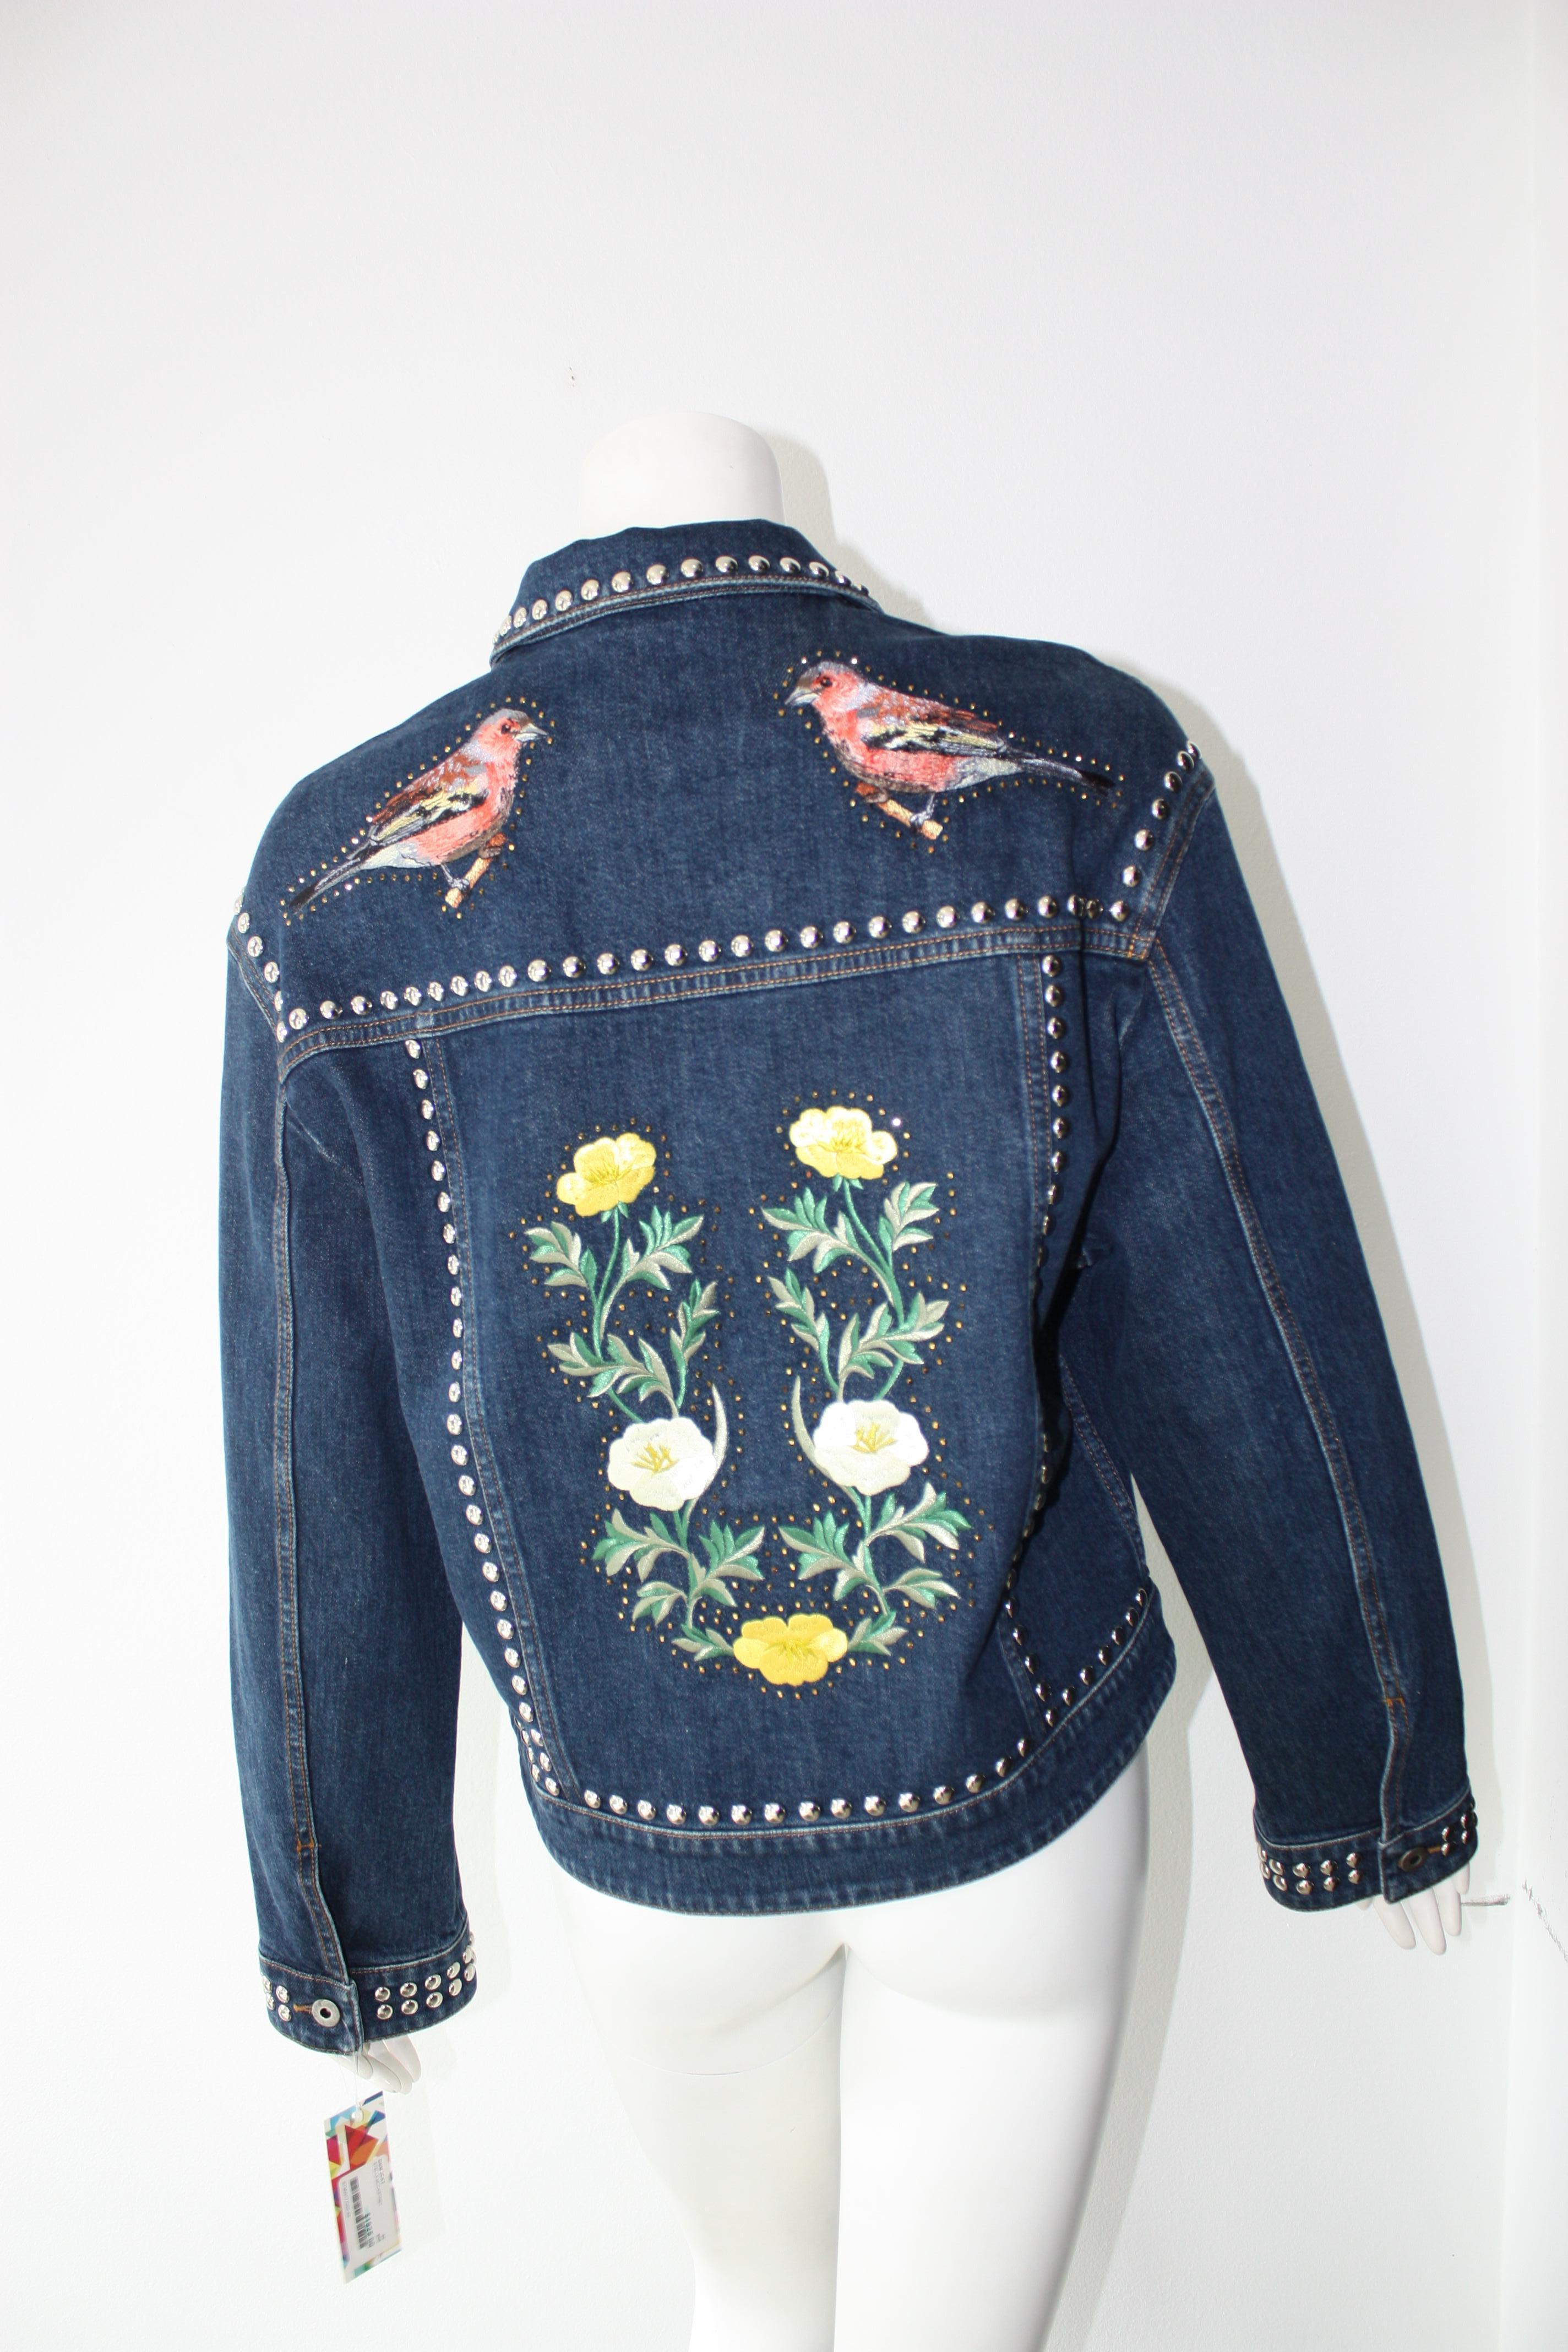 Stella McCartney Denim Multi-Colored and Floral Embroidered Jacket  2